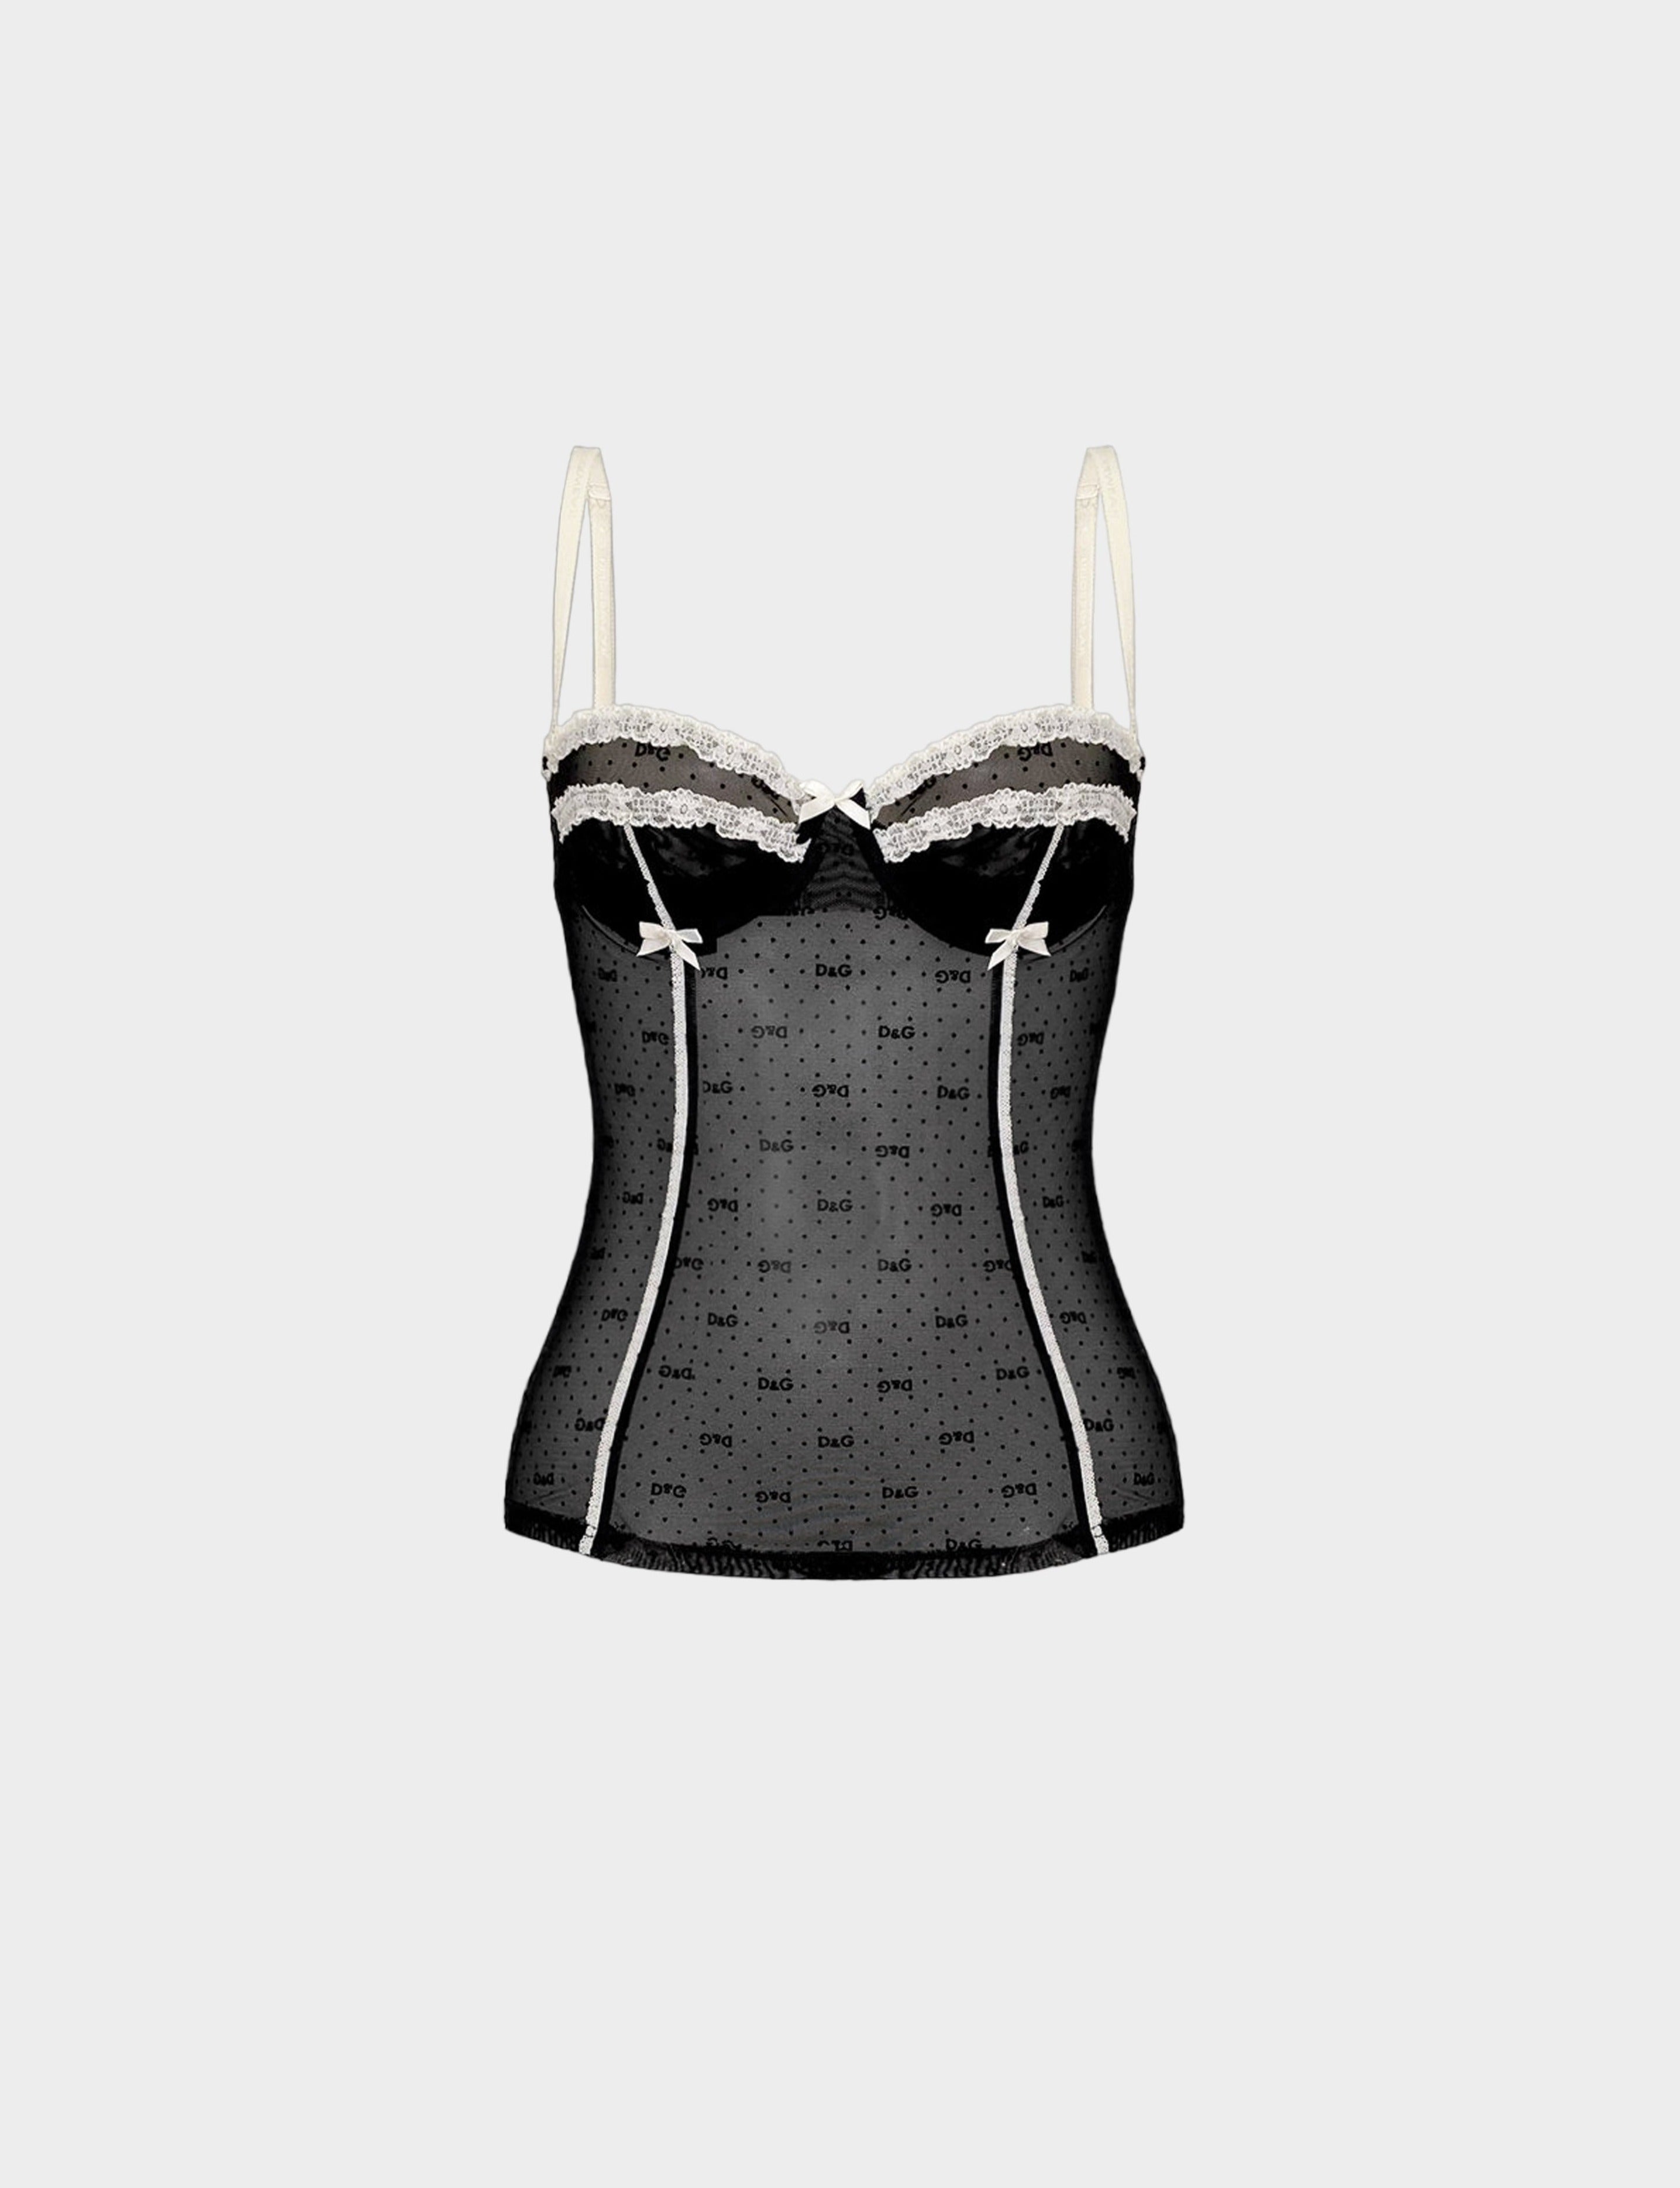 Dolce & Gabbana D&G 2000s Black and Cream Sheer Lace Bustier Tank Top